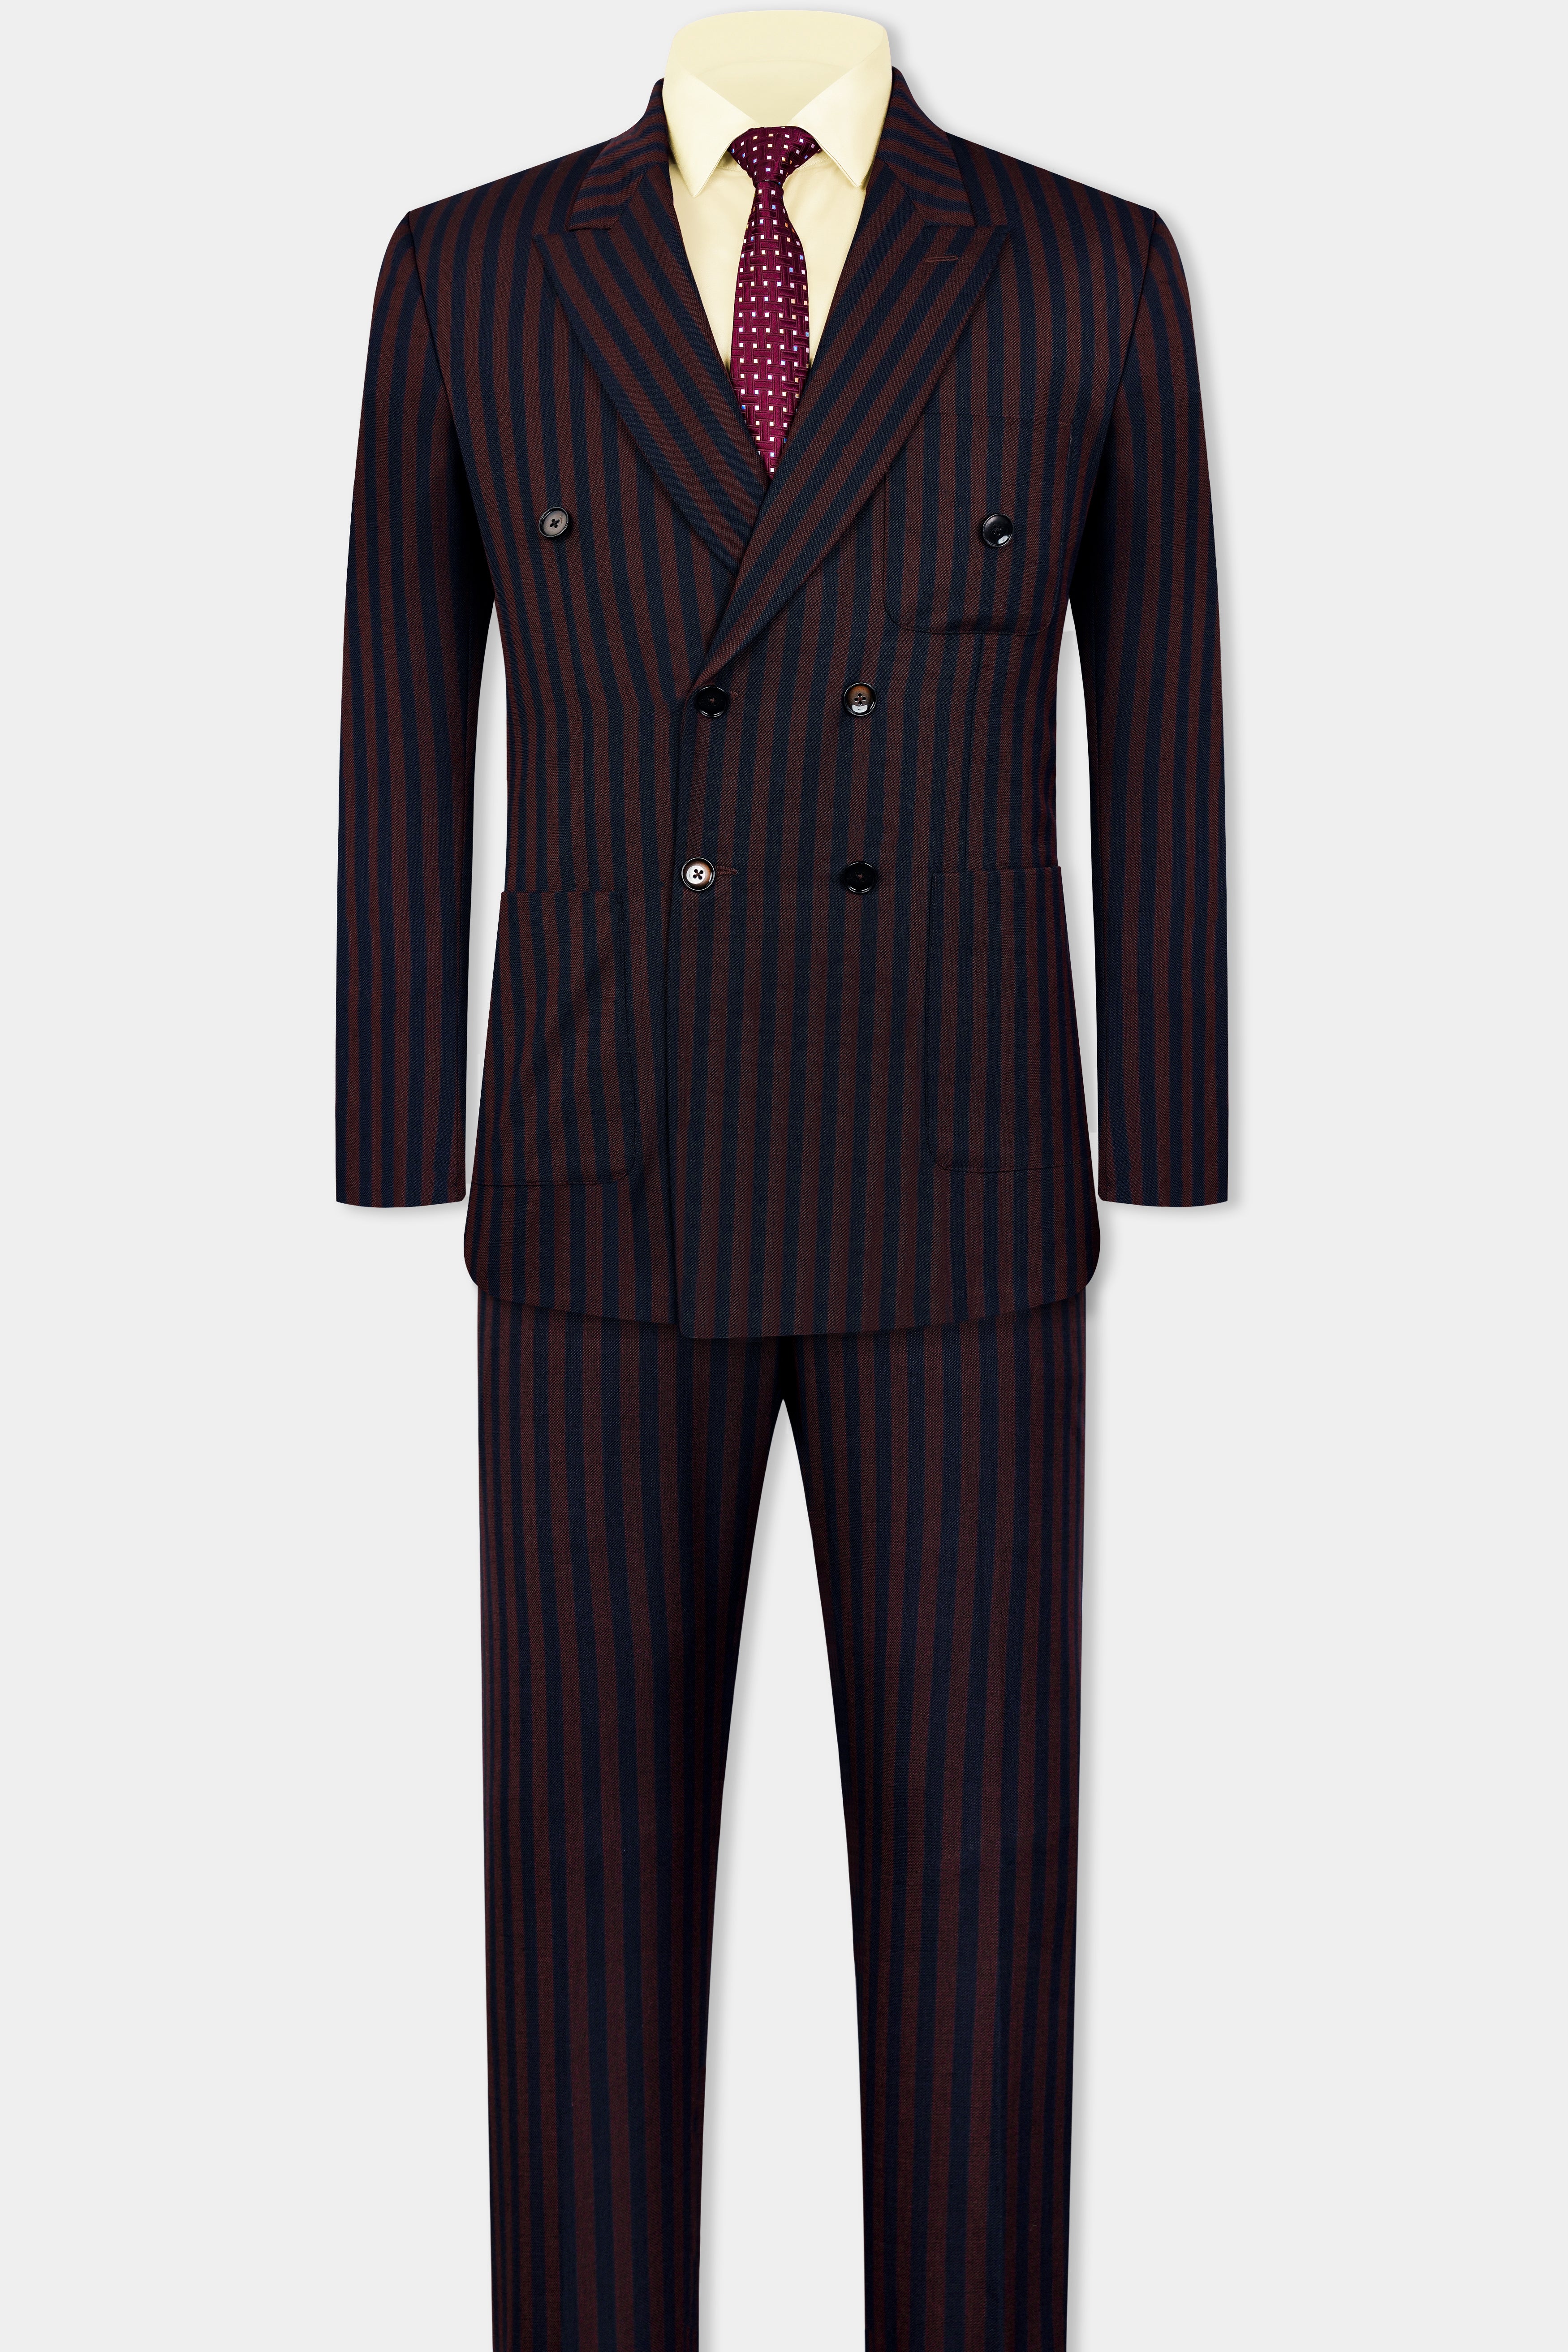 Gondola Brown and Mirage Blue Striped Wool Rich Double Breasted Sports Suit ST3114-DB-PP-36, ST3114-DB-PP-38, ST3114-DB-PP-40, ST3114-DB-PP-42, ST3114-DB-PP-44, ST3114-DB-PP-46, ST3114-DB-PP-48, ST3114-DB-PP-50, ST3114-DB-PP-52, ST3114-DB-PP-54, ST3114-DB-PP-56, ST3114-DB-PP-58, ST3114-DB-PP-60